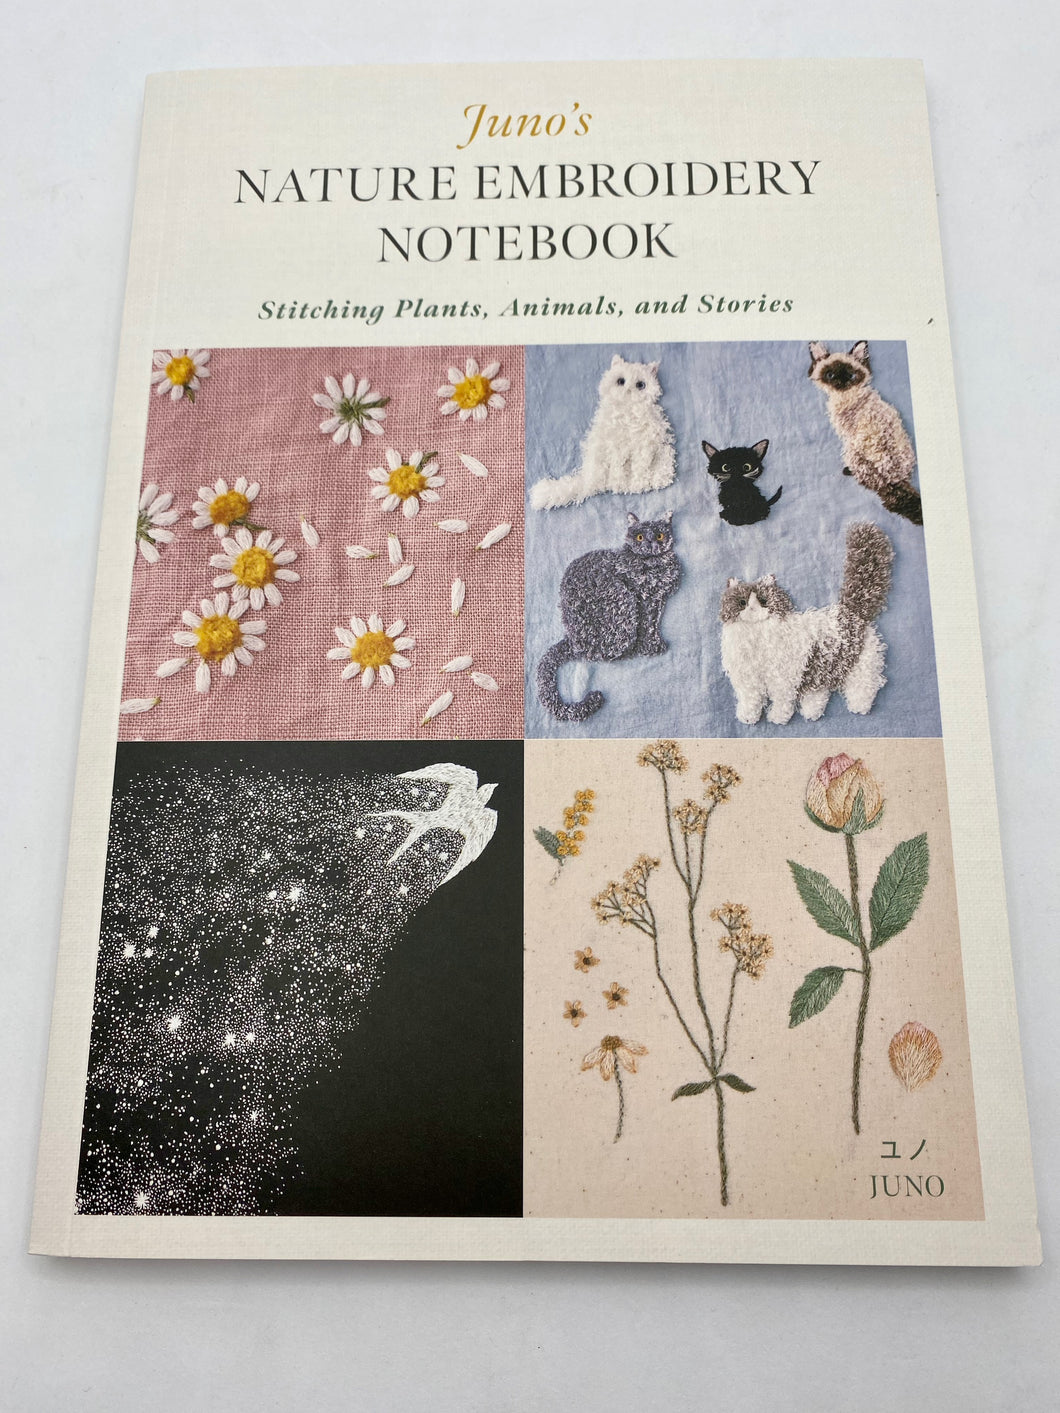 Juno's Nature Embroidery Notebook: Stitching Plants, Animals, and Stories